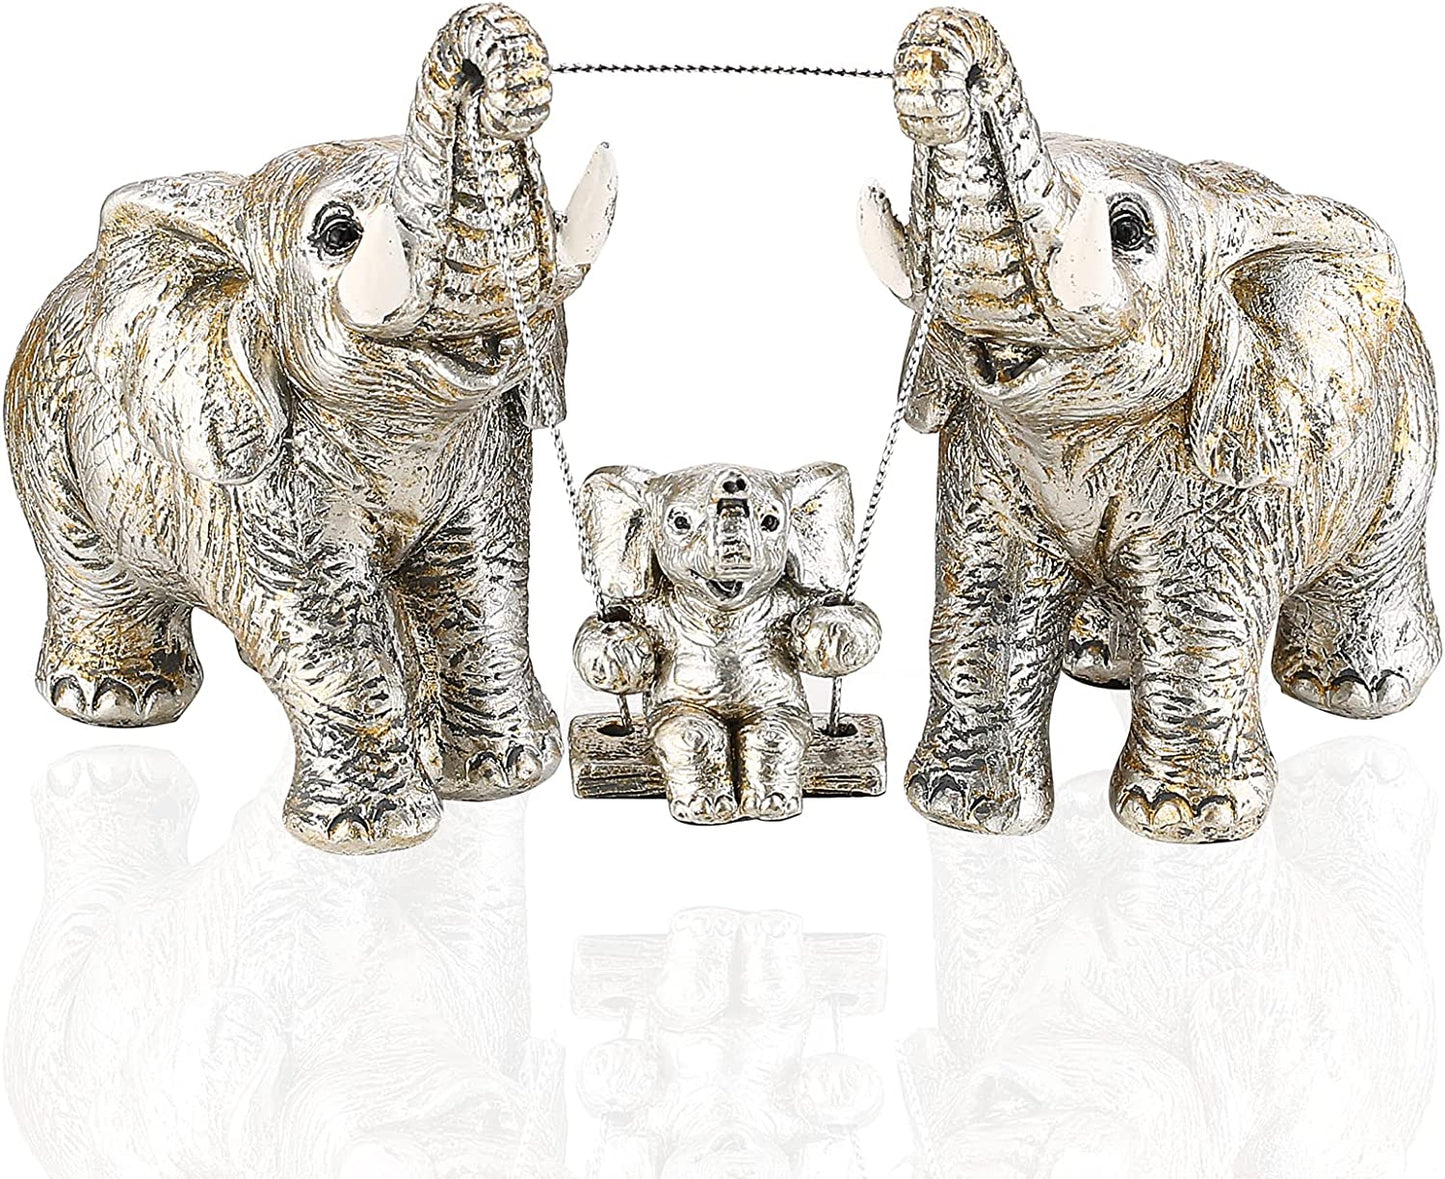 Elephant Statue Mom Gifts. Home Decor Accents Elephant Figurines for Bookshelf Living Room Office Table Shelf Decorations. Good Luck Elephant Gifts for Women (Silver)